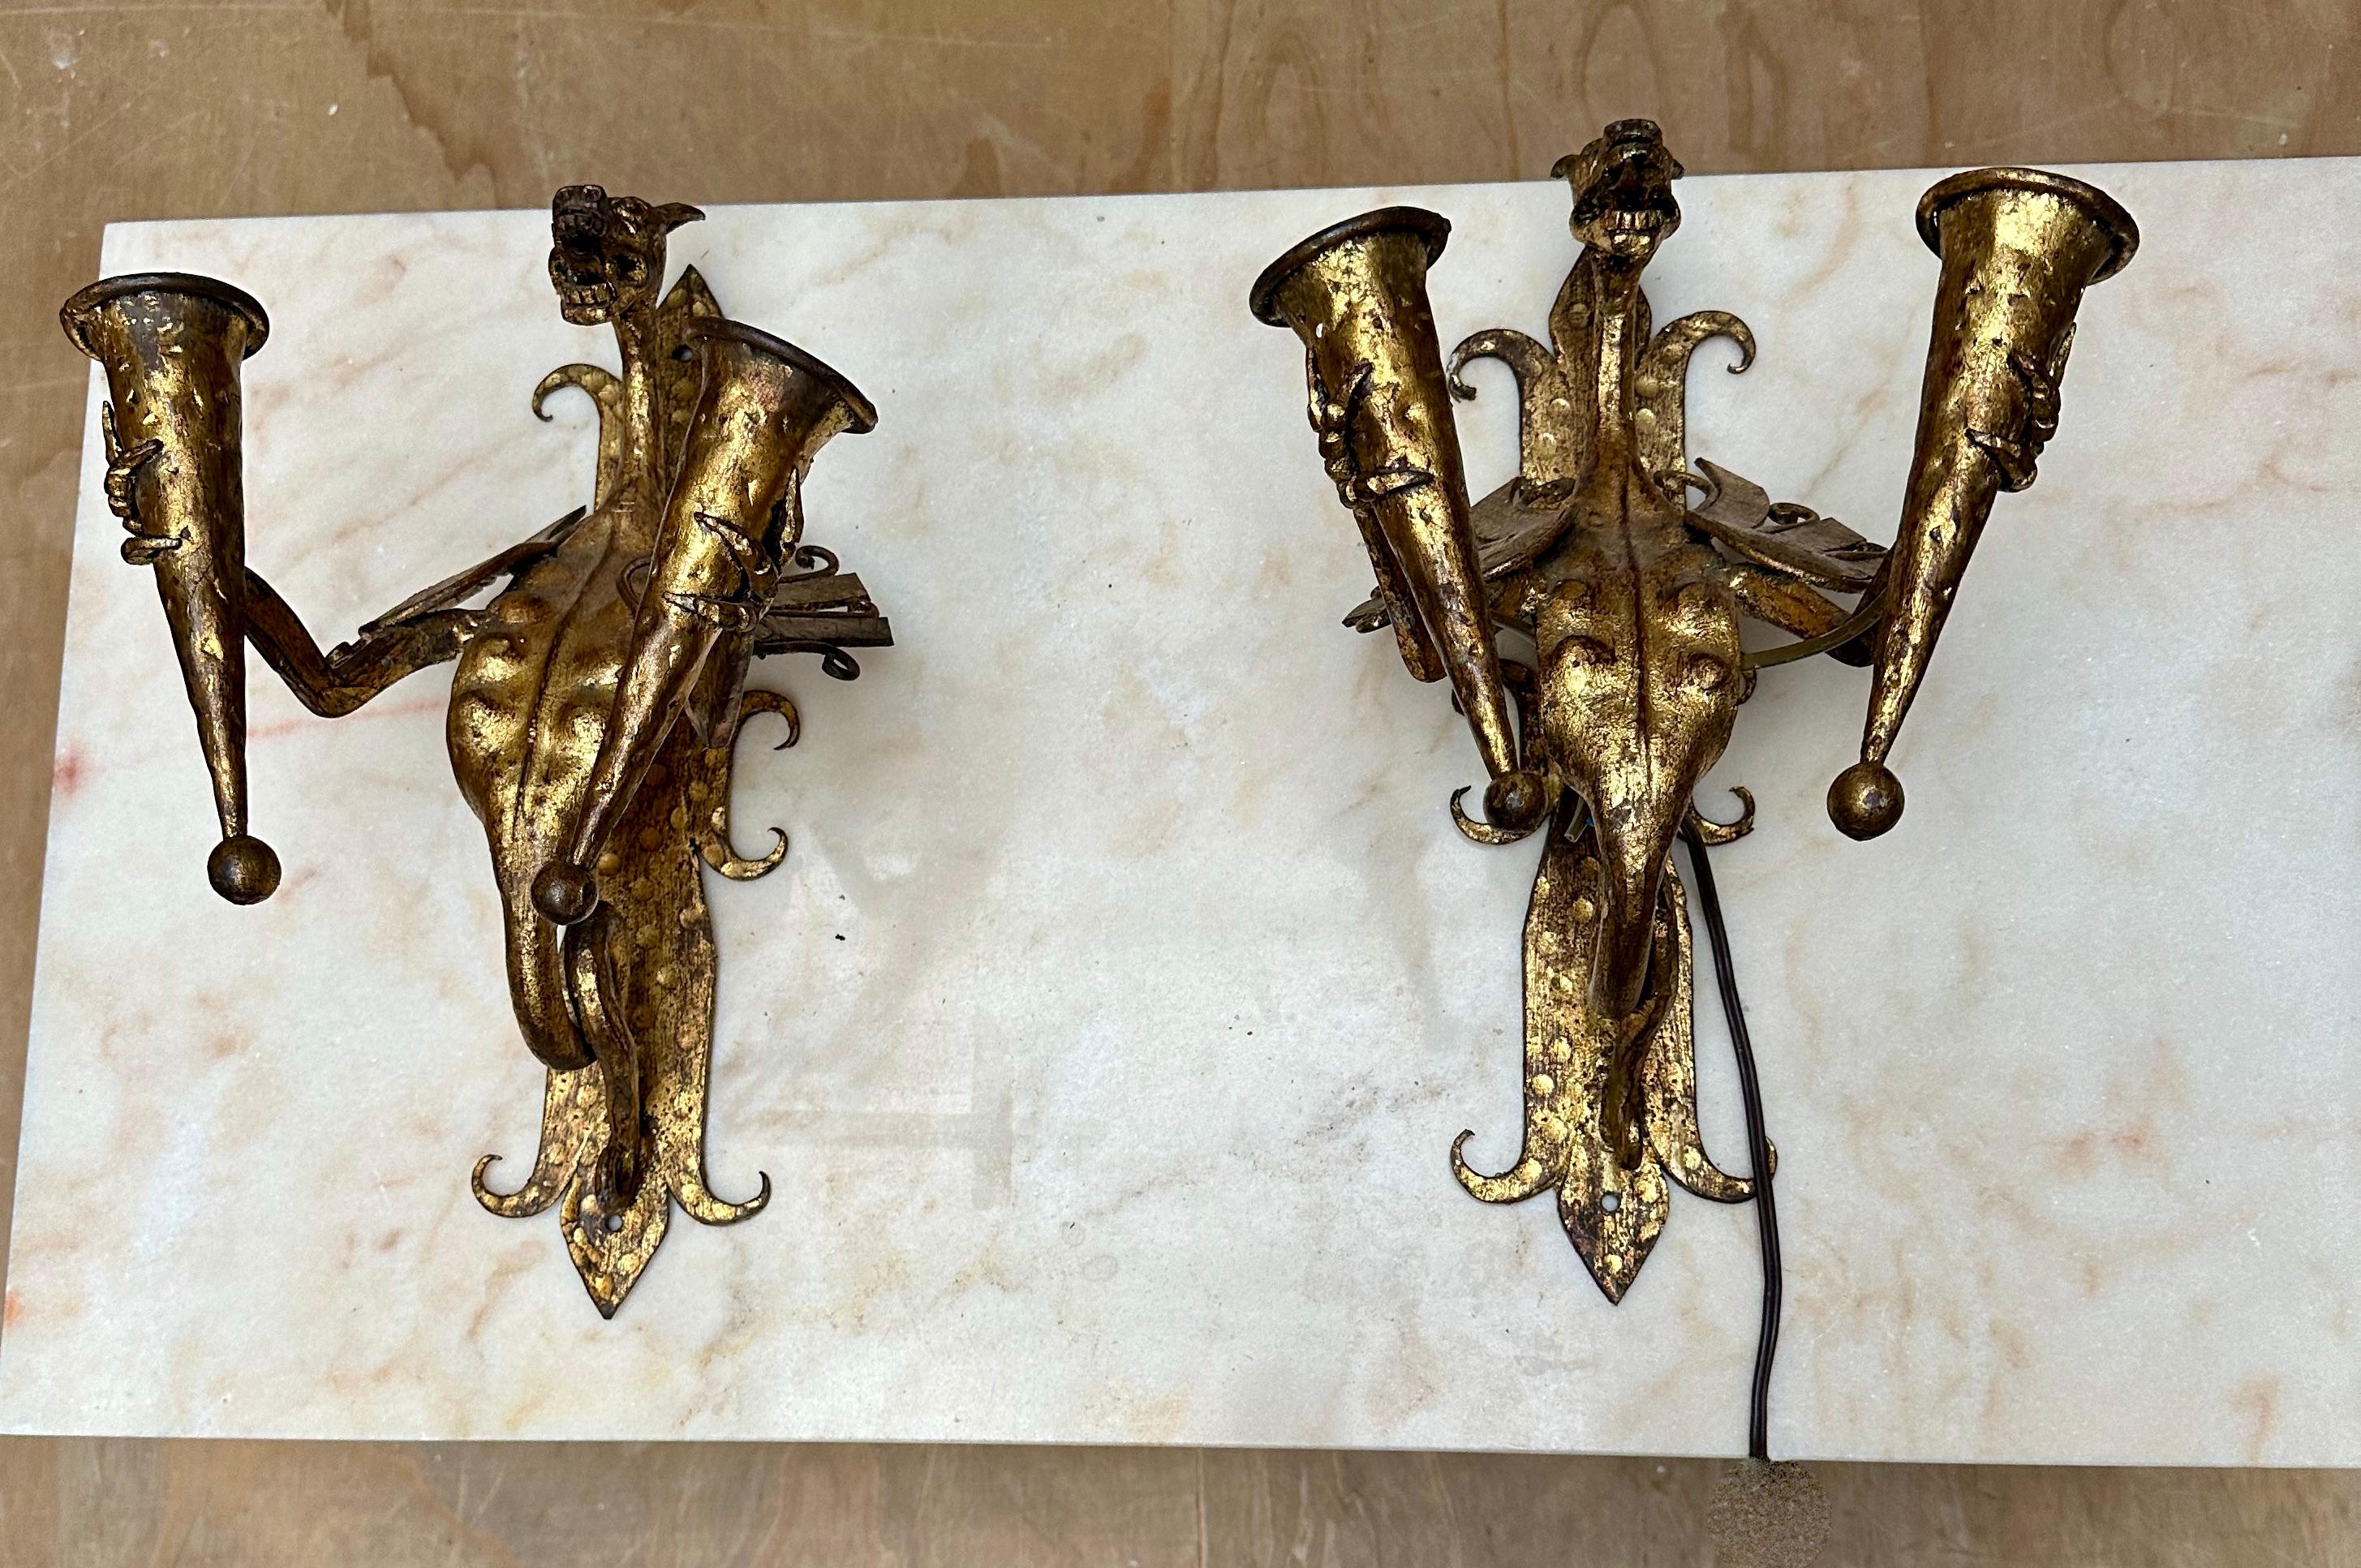 Gothic Revival pair of sculptural and highly decorative, wrought iron torchiere holders wall lamps.

If you appreciate decorative antiques in general and you are looking for a pair of large Medieval style wall fixtures in particular then this rare